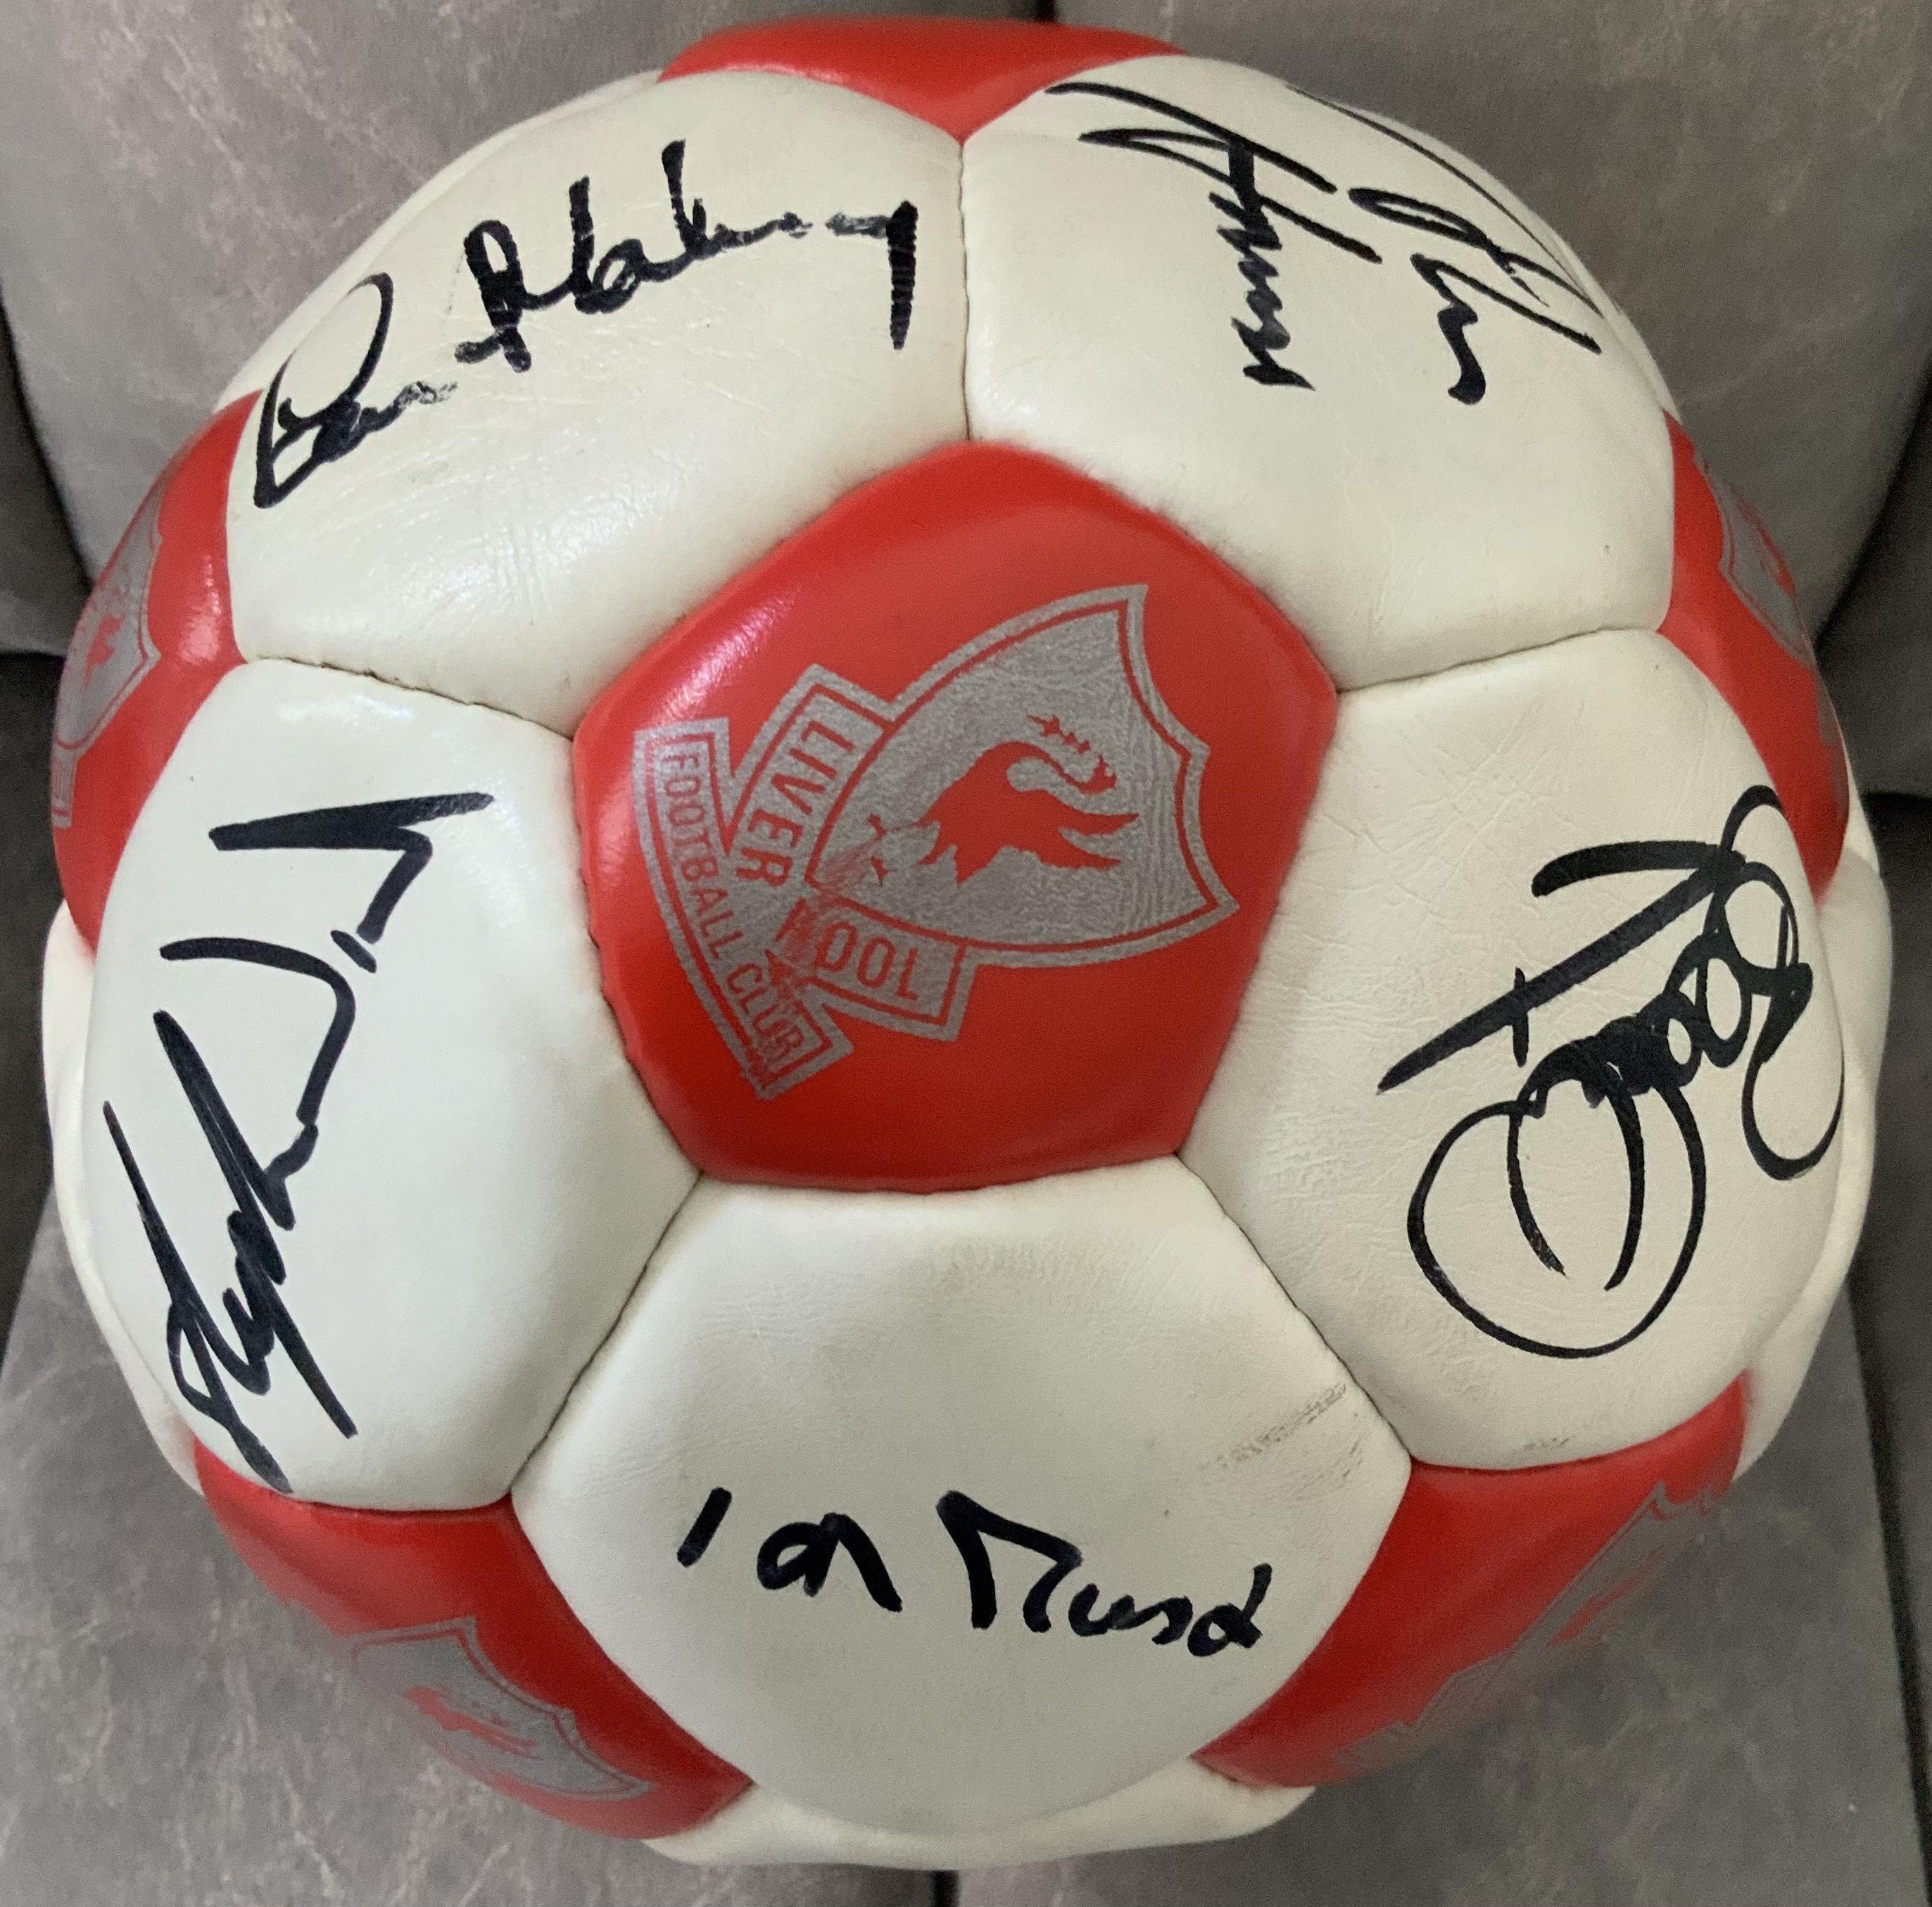 Liverpool 88/89 FA Cup Winners Signed Football: Official Liverpool ball with genuine autographs